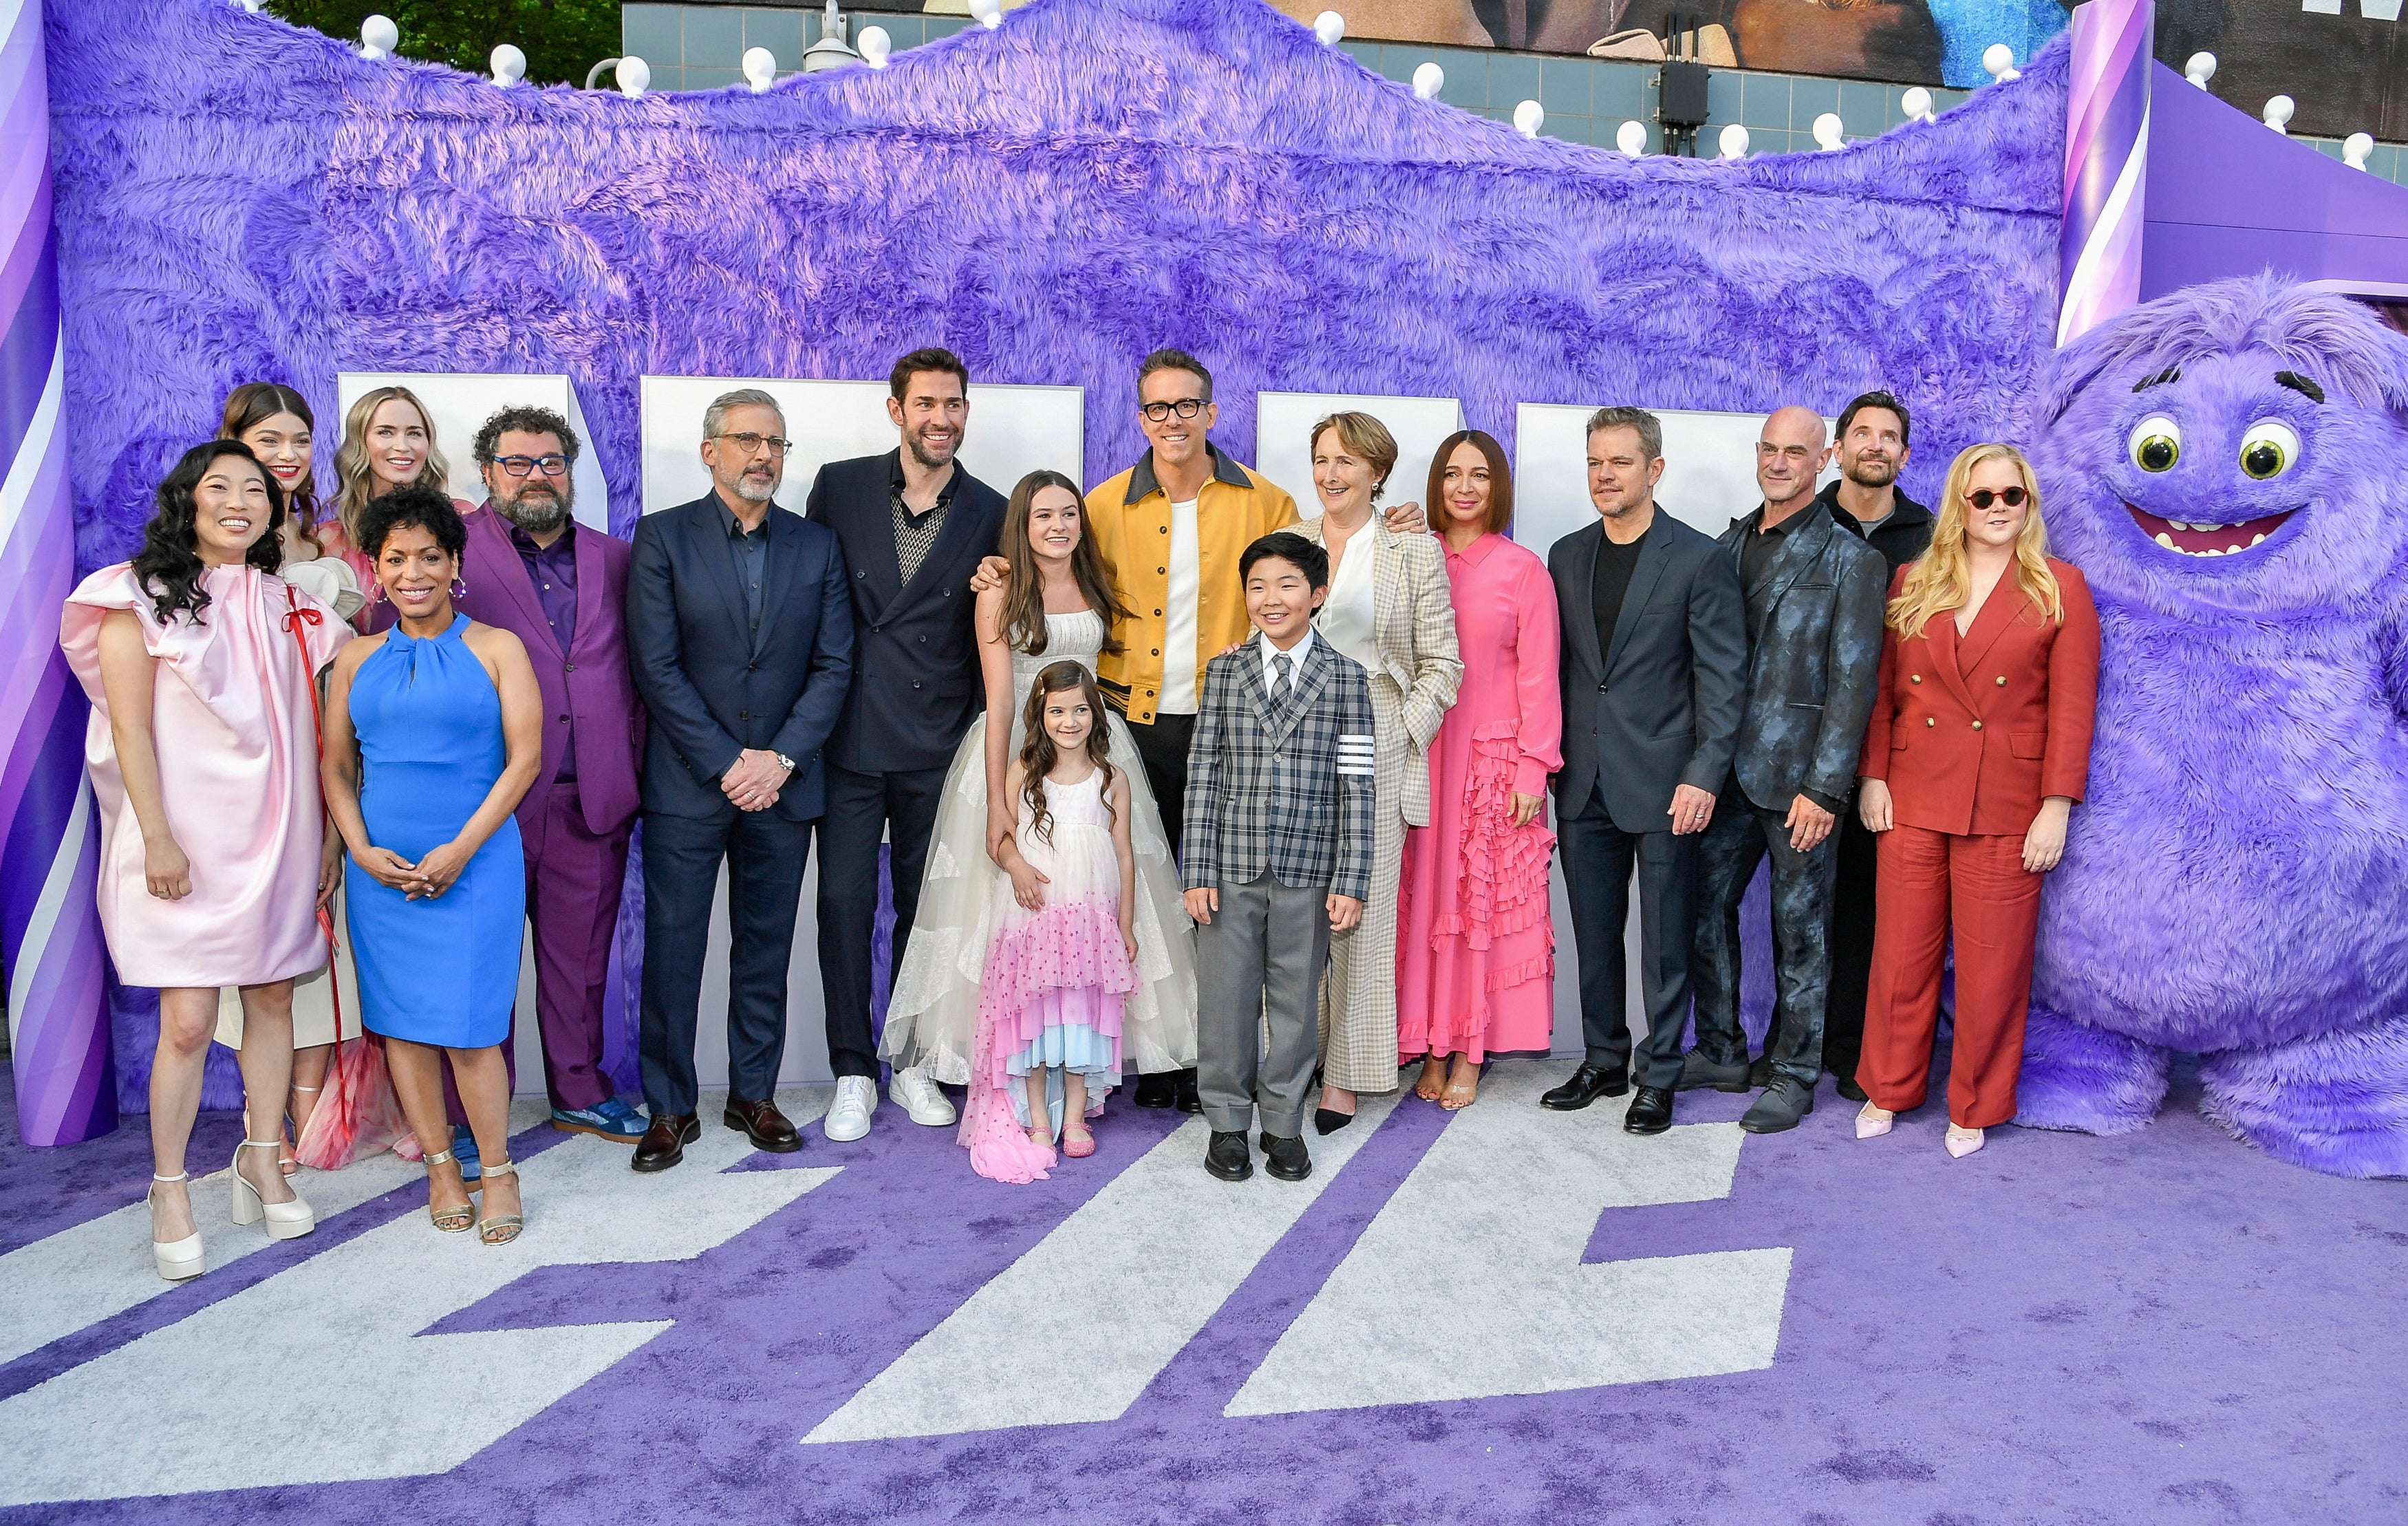 Cast members pose together at the premiere of Paramount Pictures’ “IF"